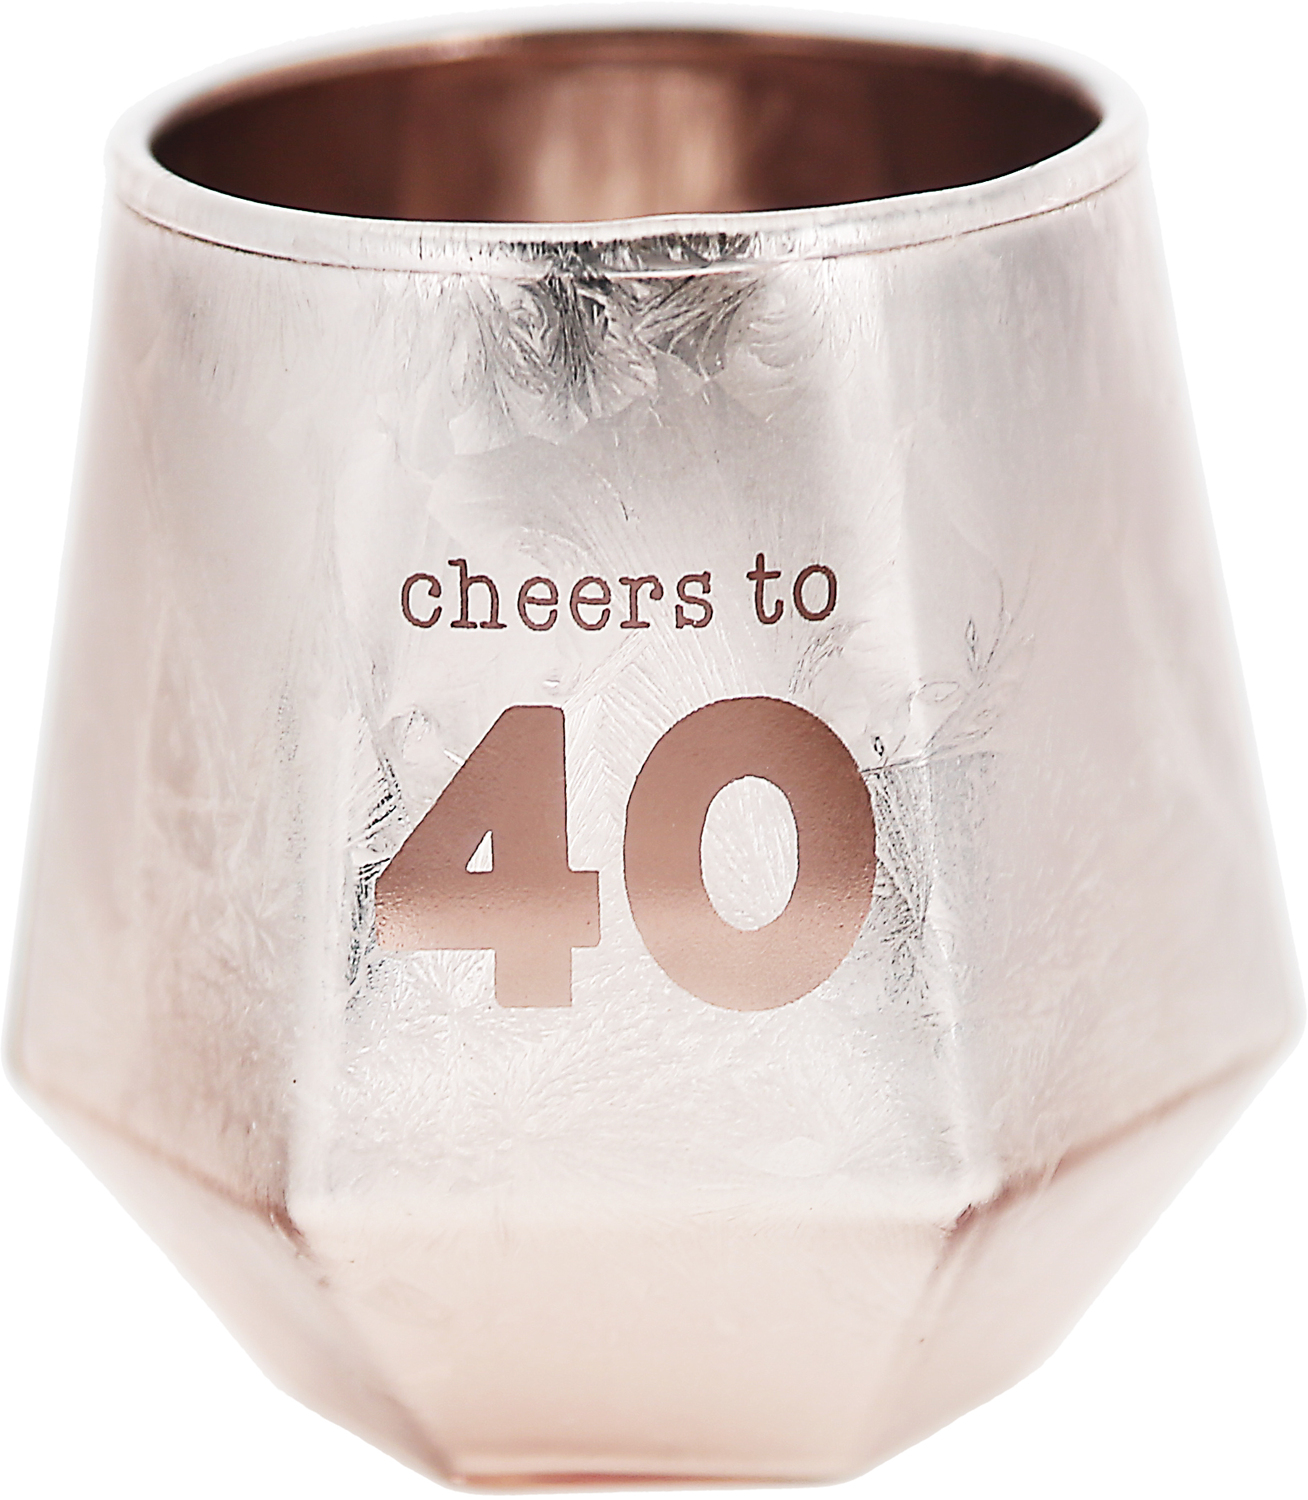 Cheers to 40 by Happy Confetti to You - Cheers to 40 - 3 oz Geometric Shot Glass